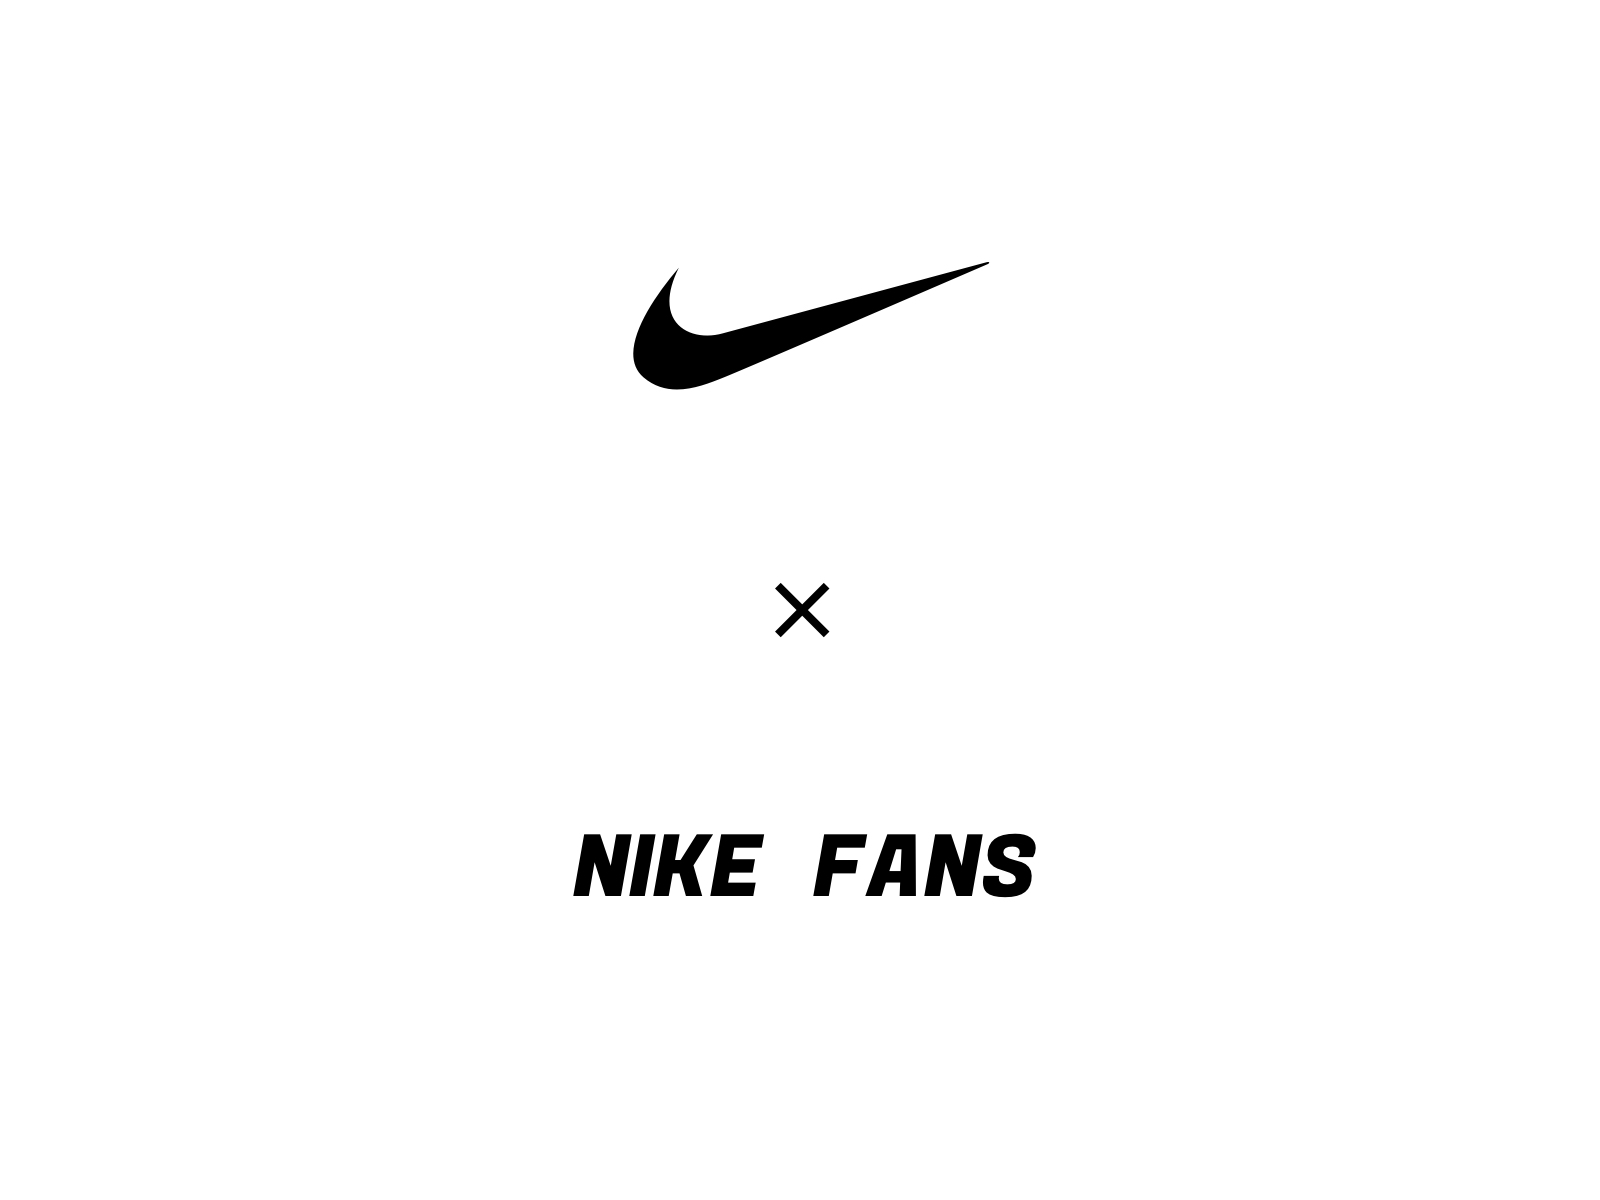 Nike Fans by Arey阿睿 on Dribbble